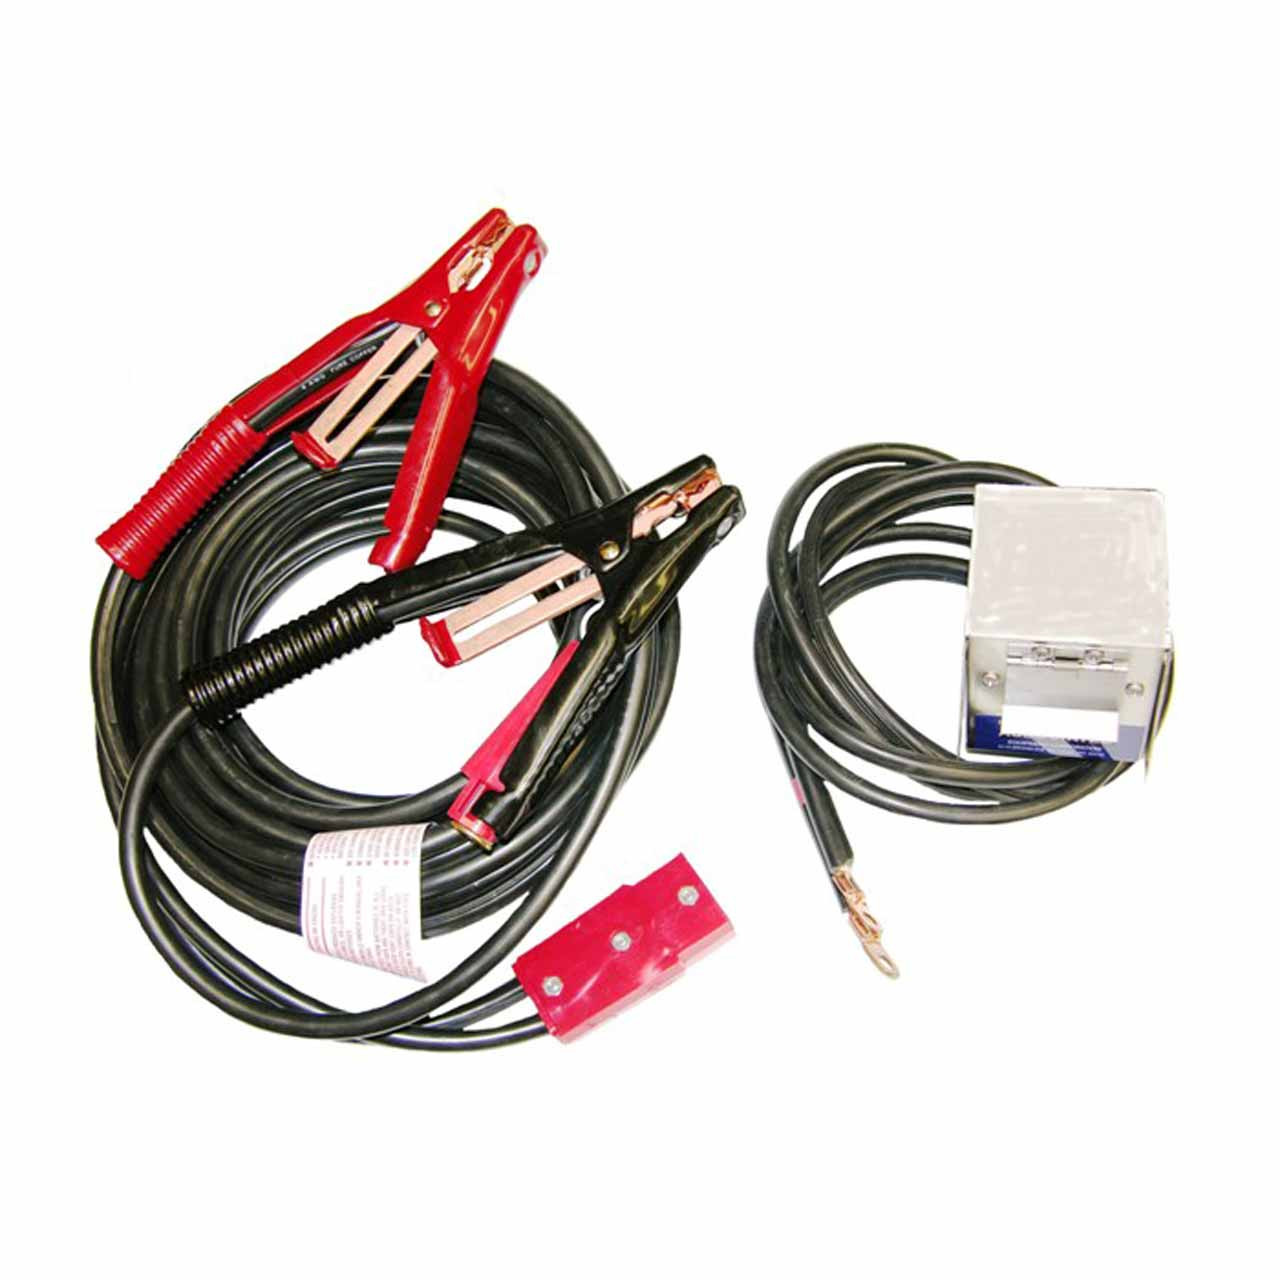 Jump Start With Jumper Cables Or Jump Boxes - Now! Towing Service